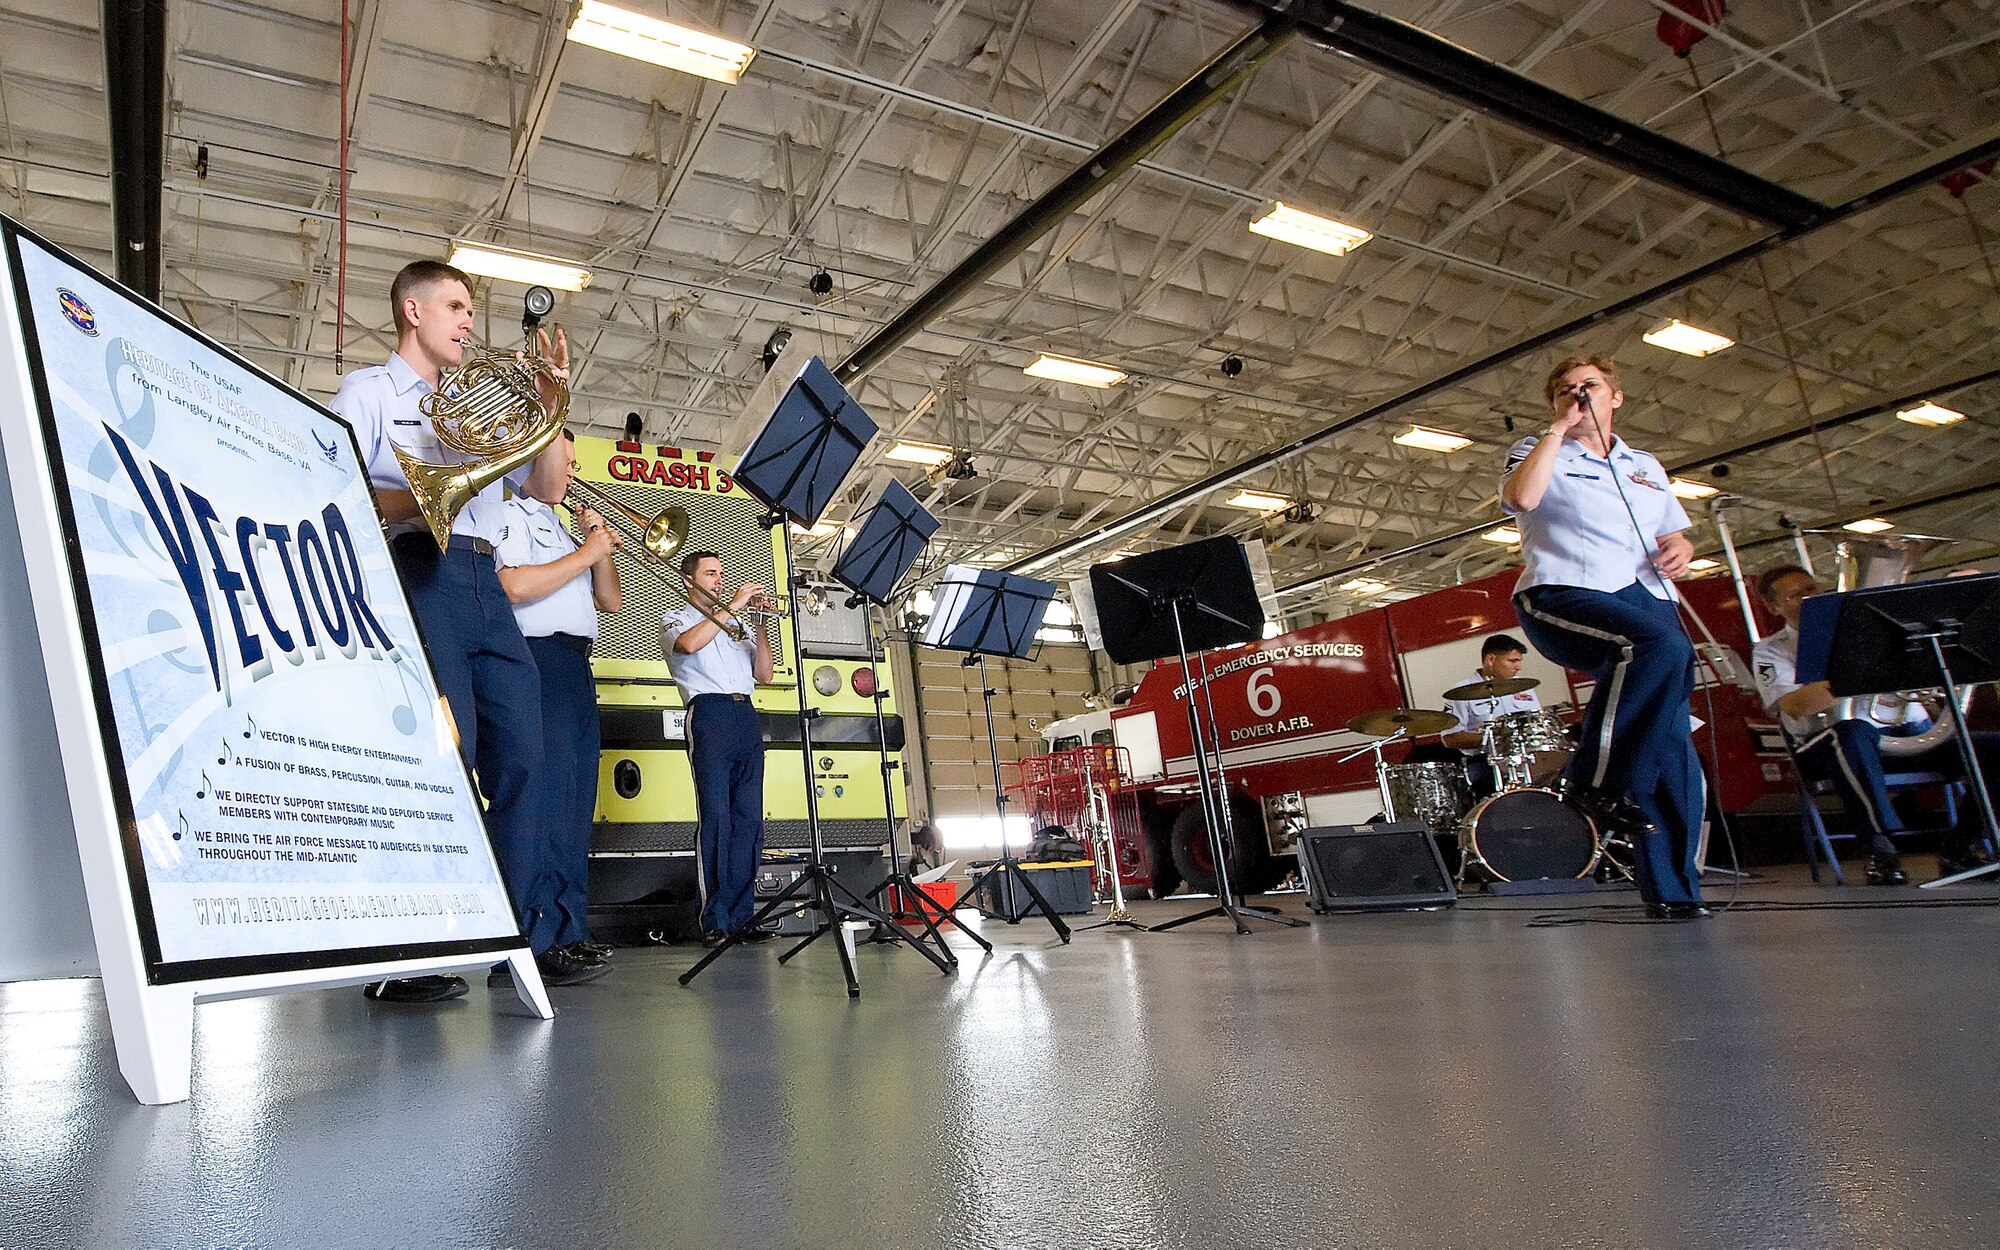 Vector, a traveling ensemble from the Heritage of America Band stationed at Langley Air Force Base, Va., performs at the Fire Station at Dover Air Force Base June 15. Vector performed at several locations around Dover AFB and the local community. (U.S. Air Force photo/Tom Randle)